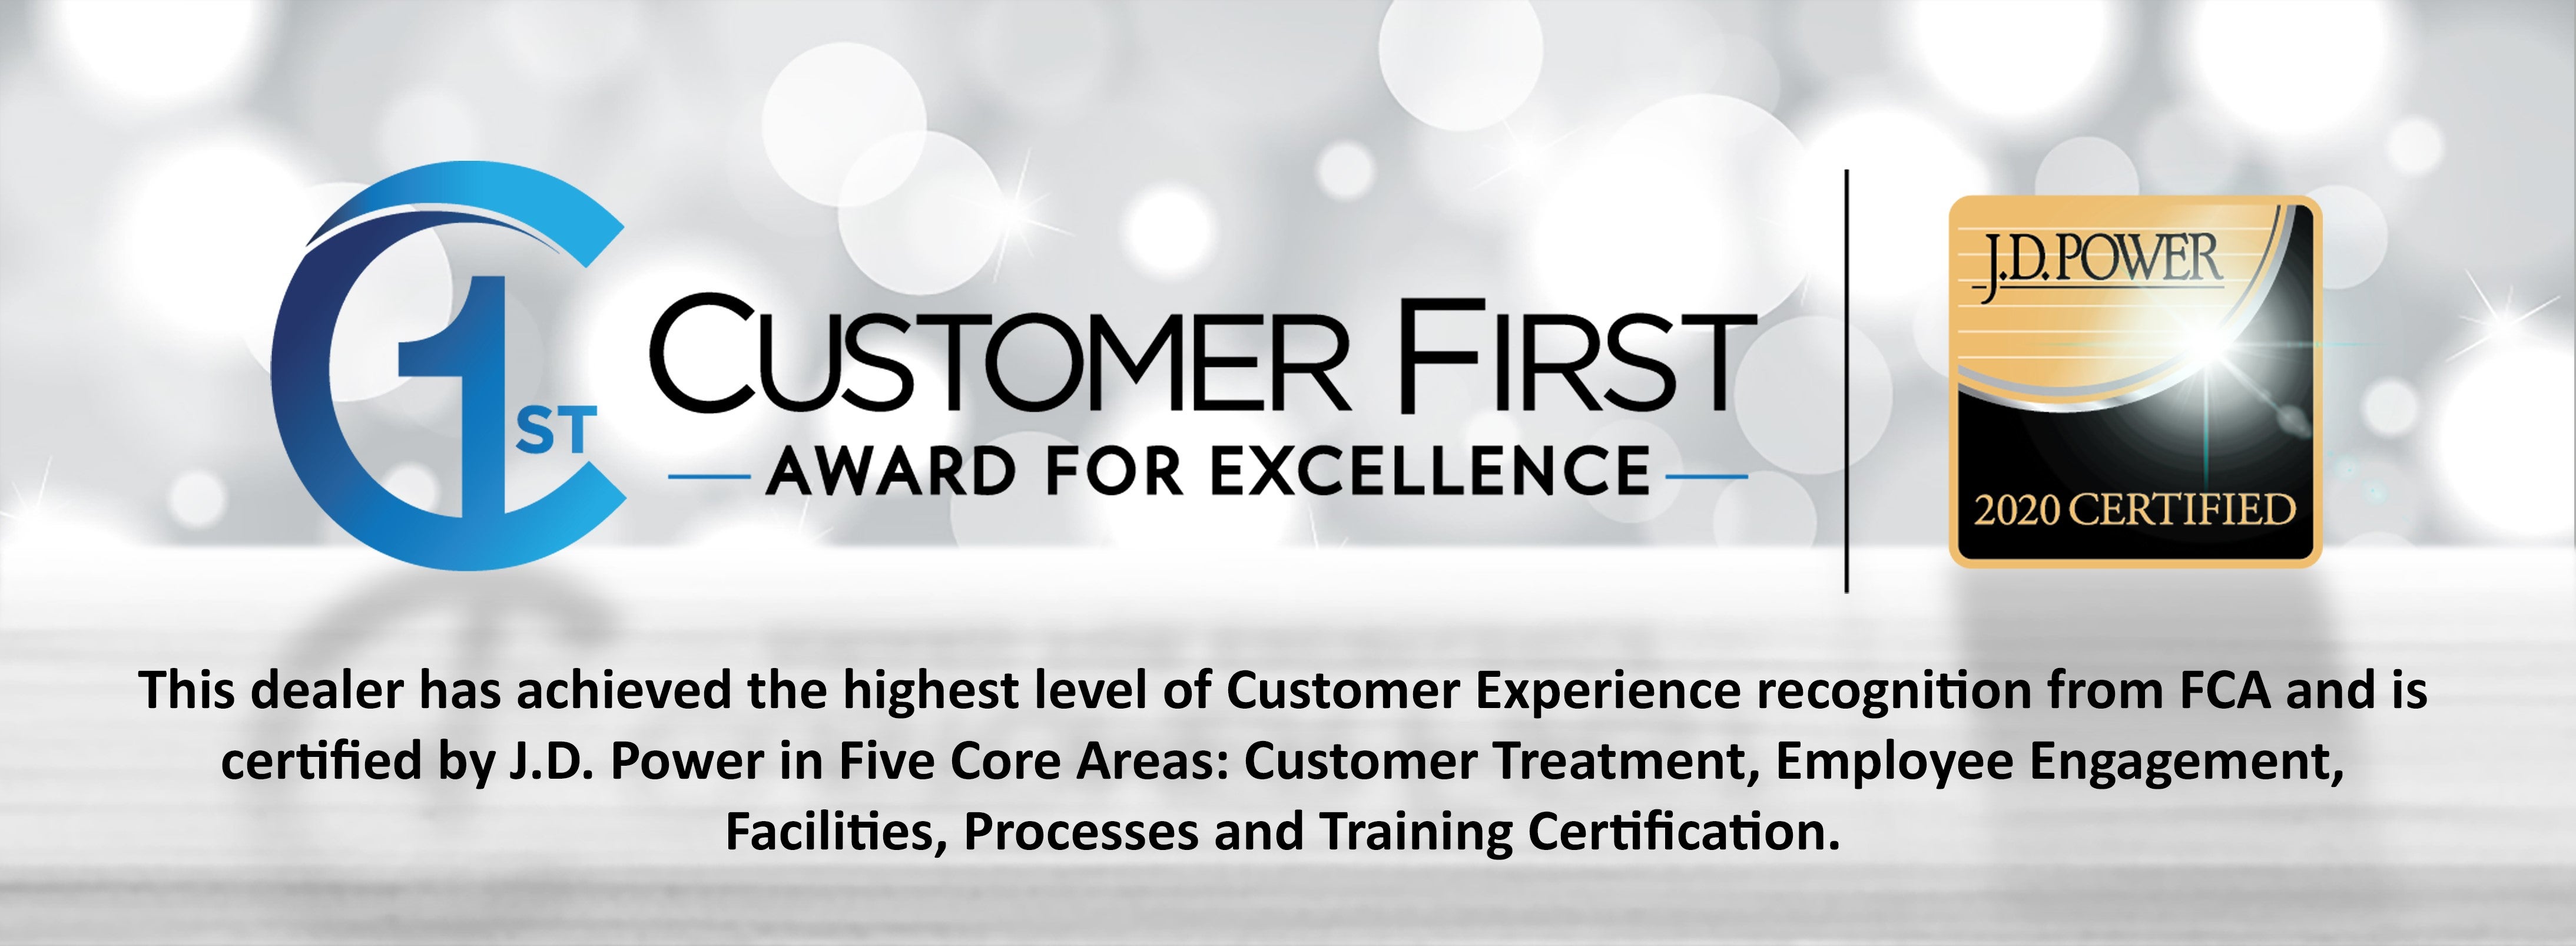 Customer First Award for Excellence for 2019 at Beck Chrysler Dodge Jeep Ram in Palatka, FL